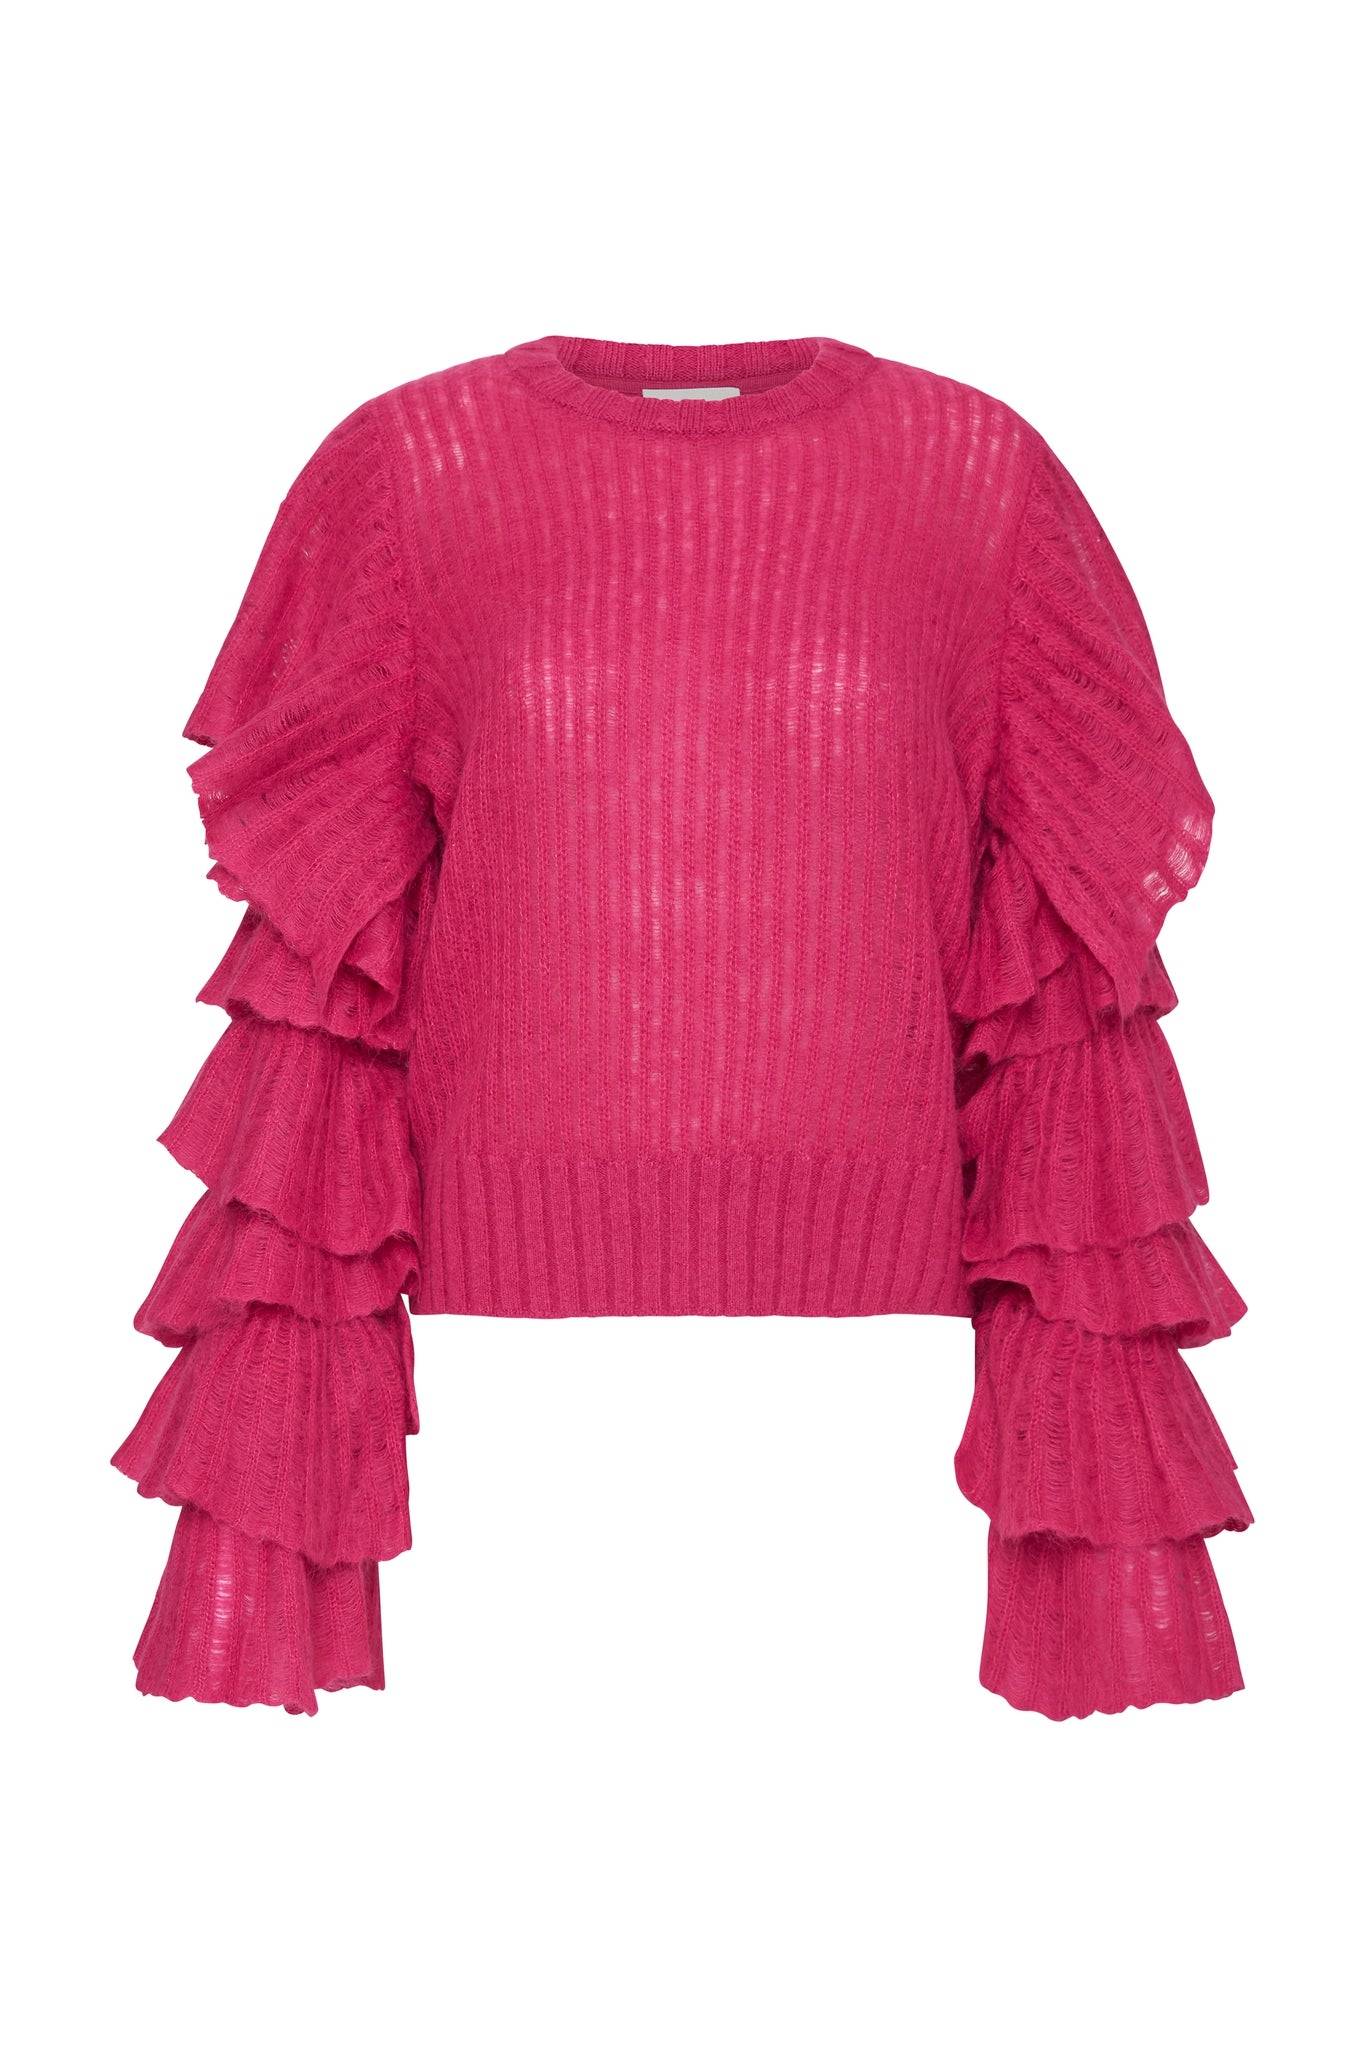 Pink frilled knit sweater